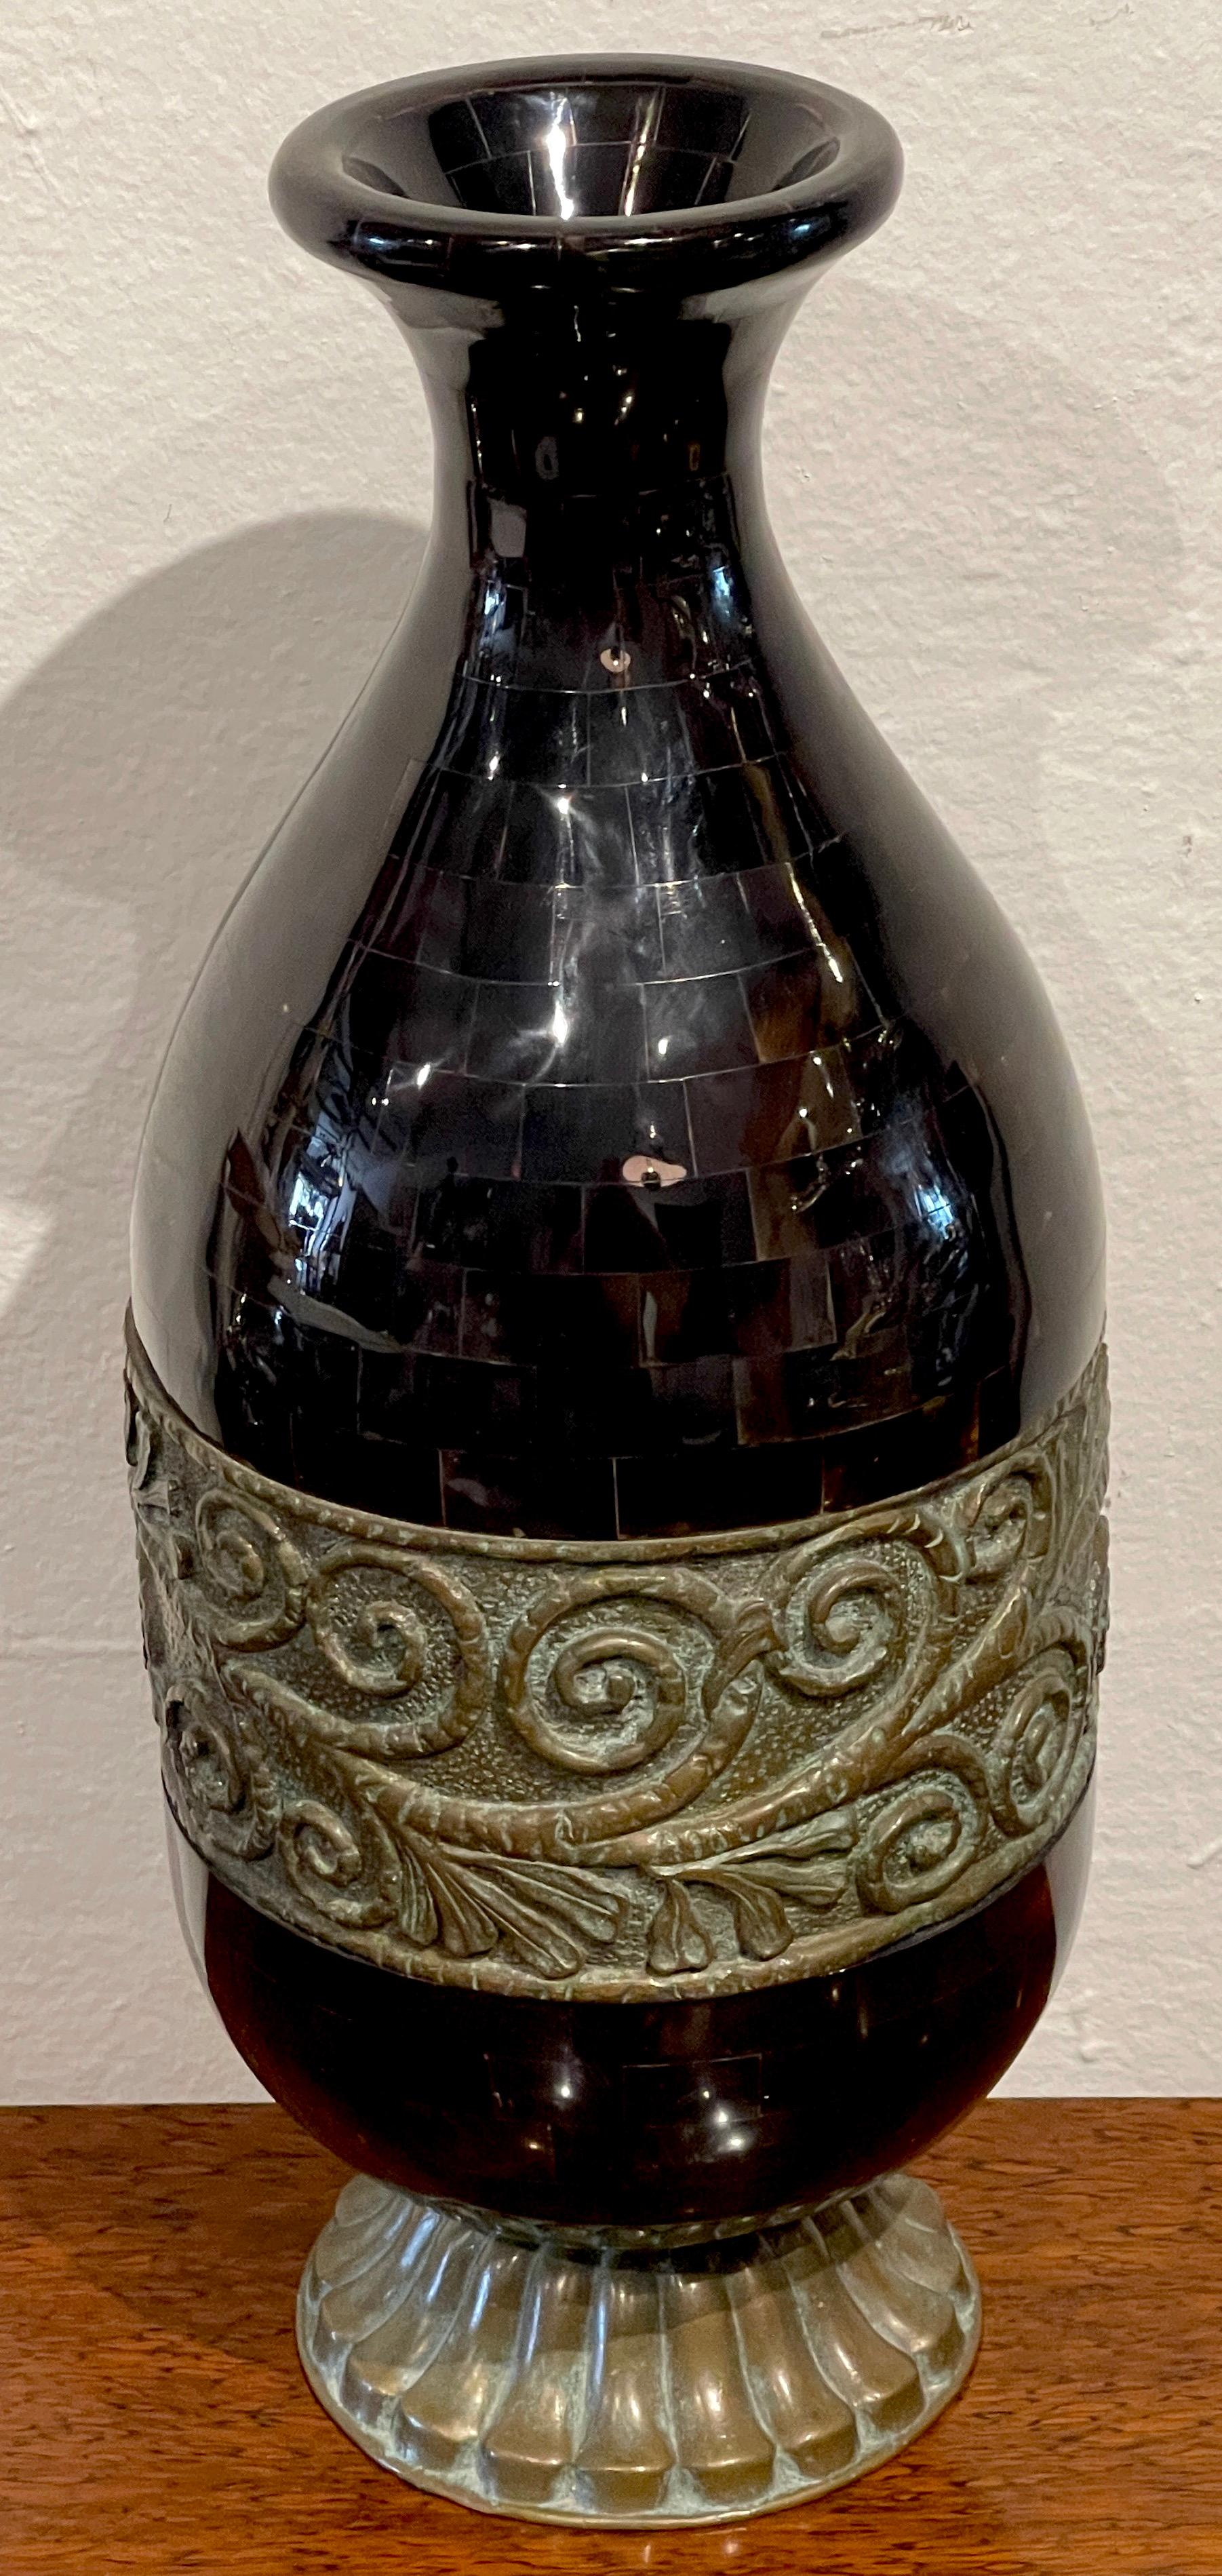 Modern polished horn & bronze vase by Maitland-Smith 
Circa 1980s

Of typical form, with continuous inlaid/mosaic rectangular polished horn pieces, undulating vase form, the vases shape descends, then widens with a finely cast bronze frieze of